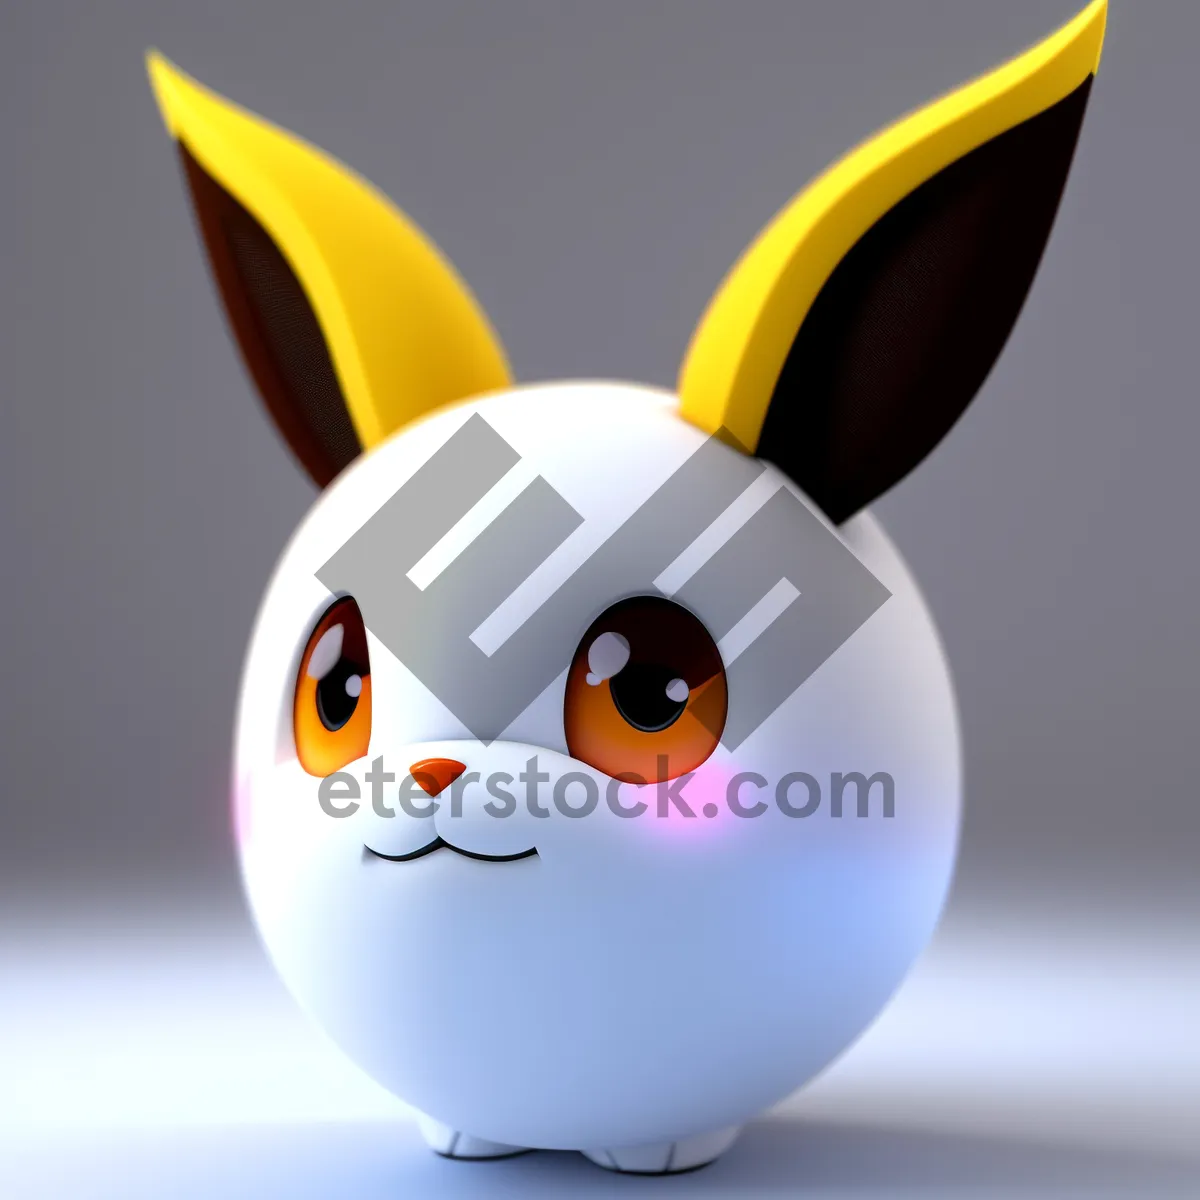 Picture of Cute 3D Cartoon Bunny with Eyebrow